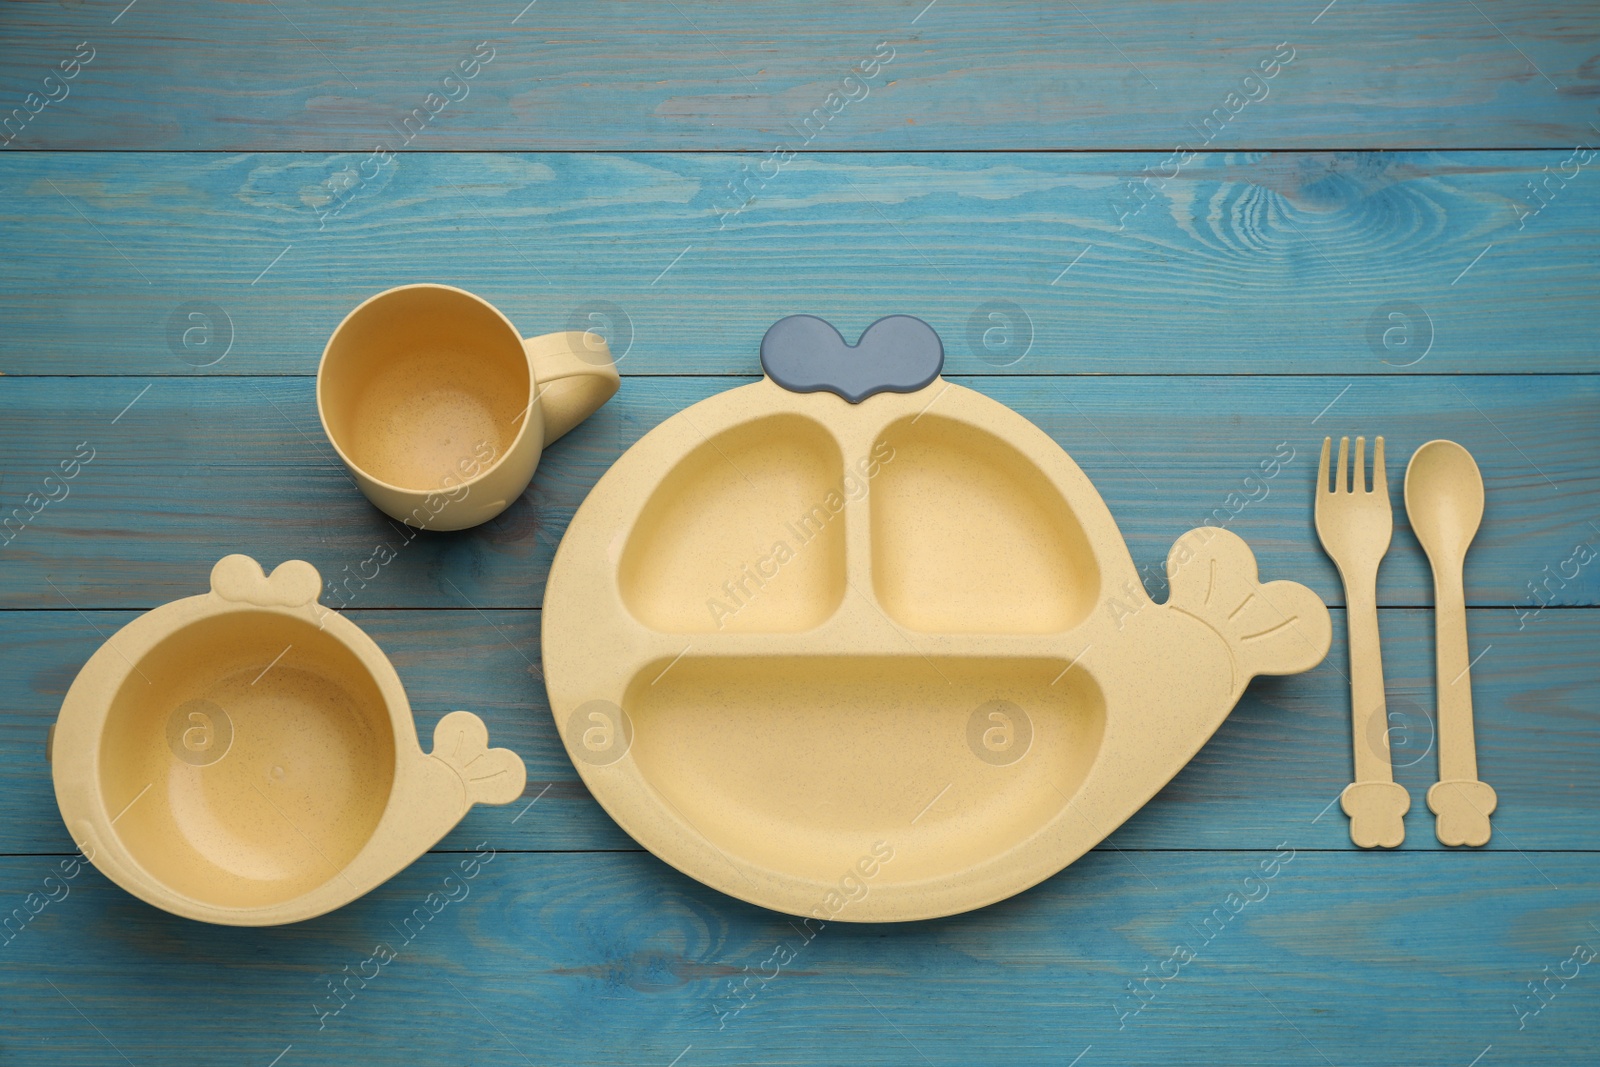 Photo of Set of plastic dishware on light blue wooden background, flat lay. Serving baby food